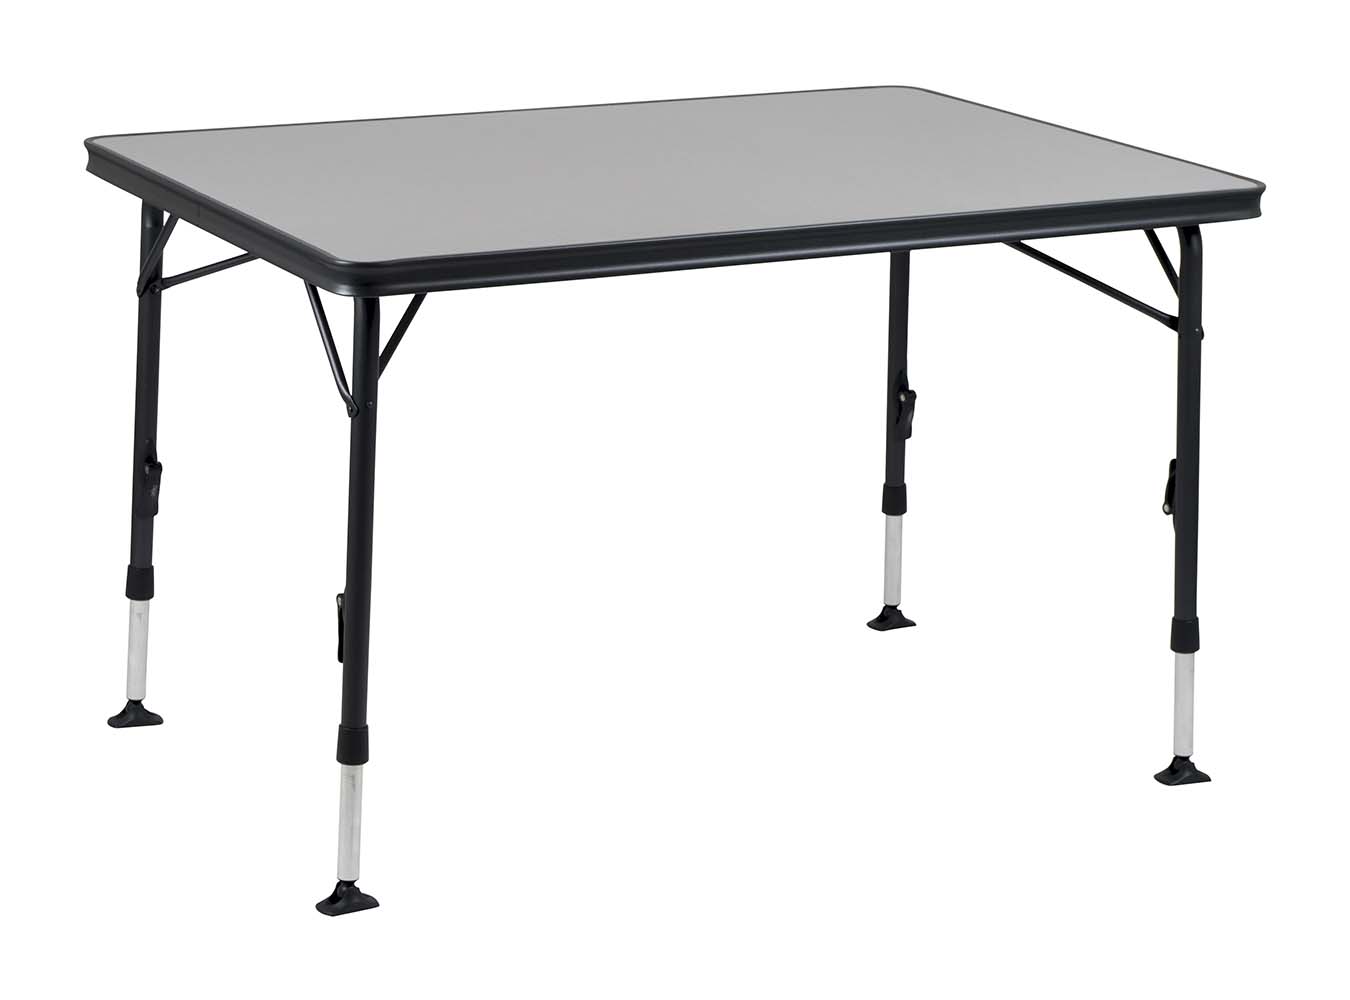 1151400 A stable high quality table. Thanks to its special construction this table is easy to open and close. In addition the feet are easy to mount in the guided aluminium rails on the underside of the table top. The table top is extra spacious so that it can accommodate up to 6 persons.  The aluminium rails at the bottom of this camp table also provide additional reinforcement. The high-quality materials and heat-resistant and waterproof tabletop ensure a long service life. The feet provide high stability through the thick and extra-reinforced pipes. The stabilizing feet provide extra grip on any surface. This table is light weight because of the aluminium frame.